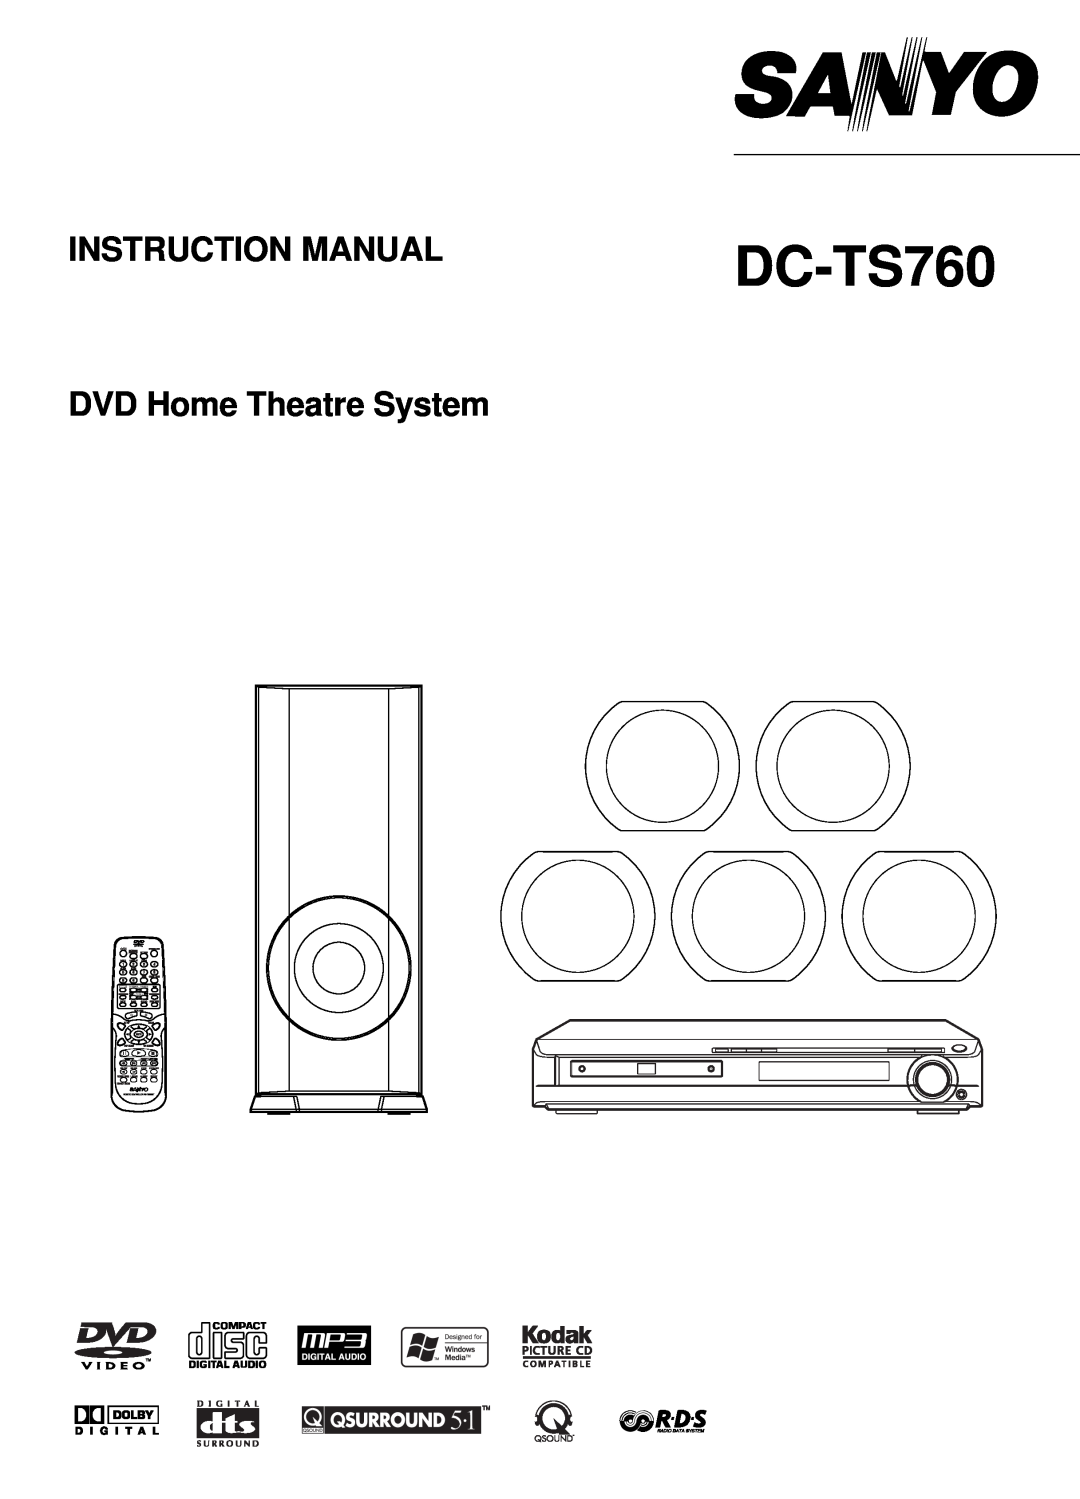 Sanyo DC-TS760 instruction manual REMOTE CONTROLLER RB-TS760ST 